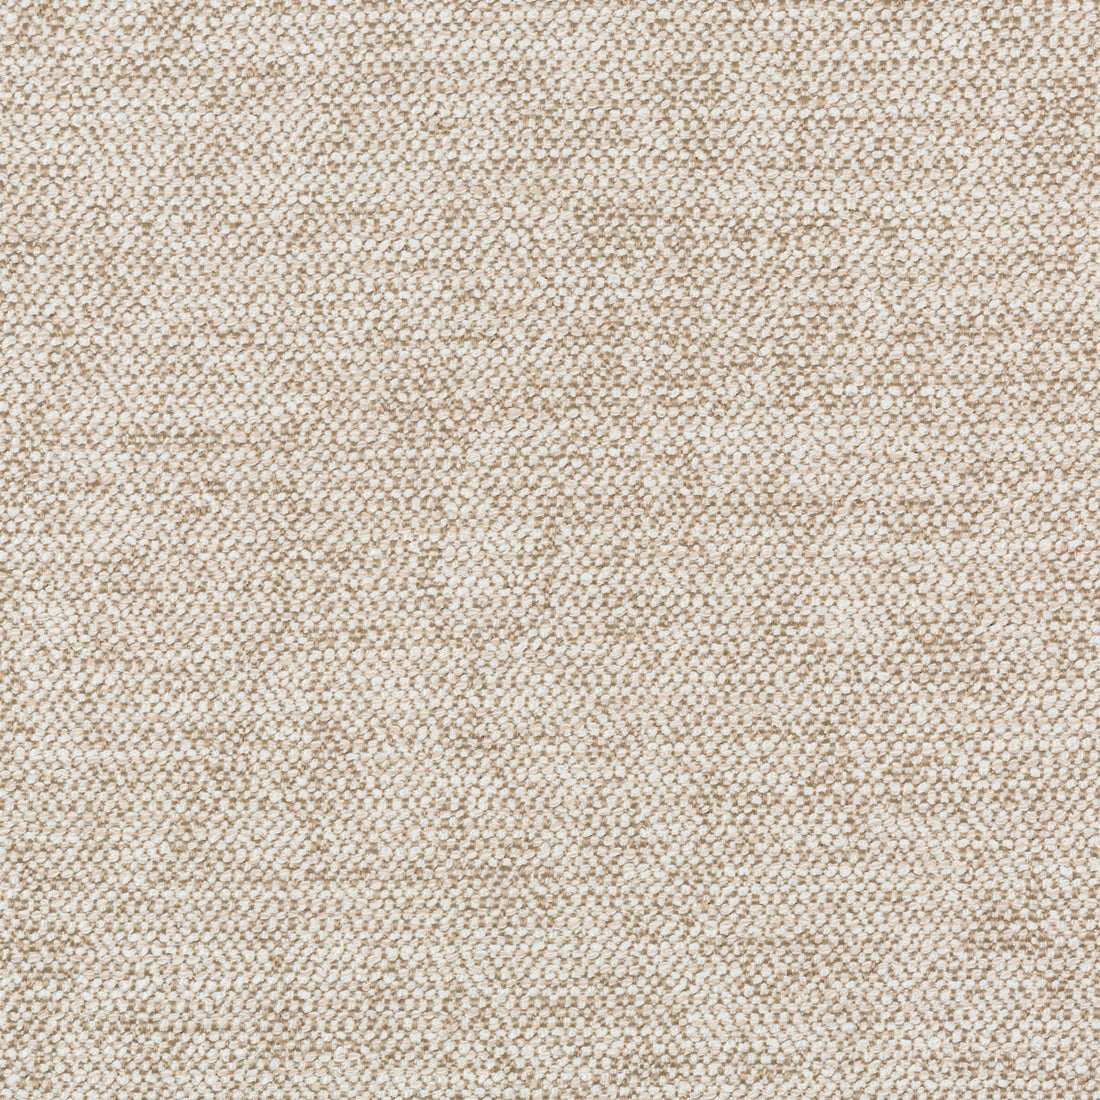 Tide Over fabric in camel color - pattern 35922.16.0 - by Kravet Couture in the Vista collection